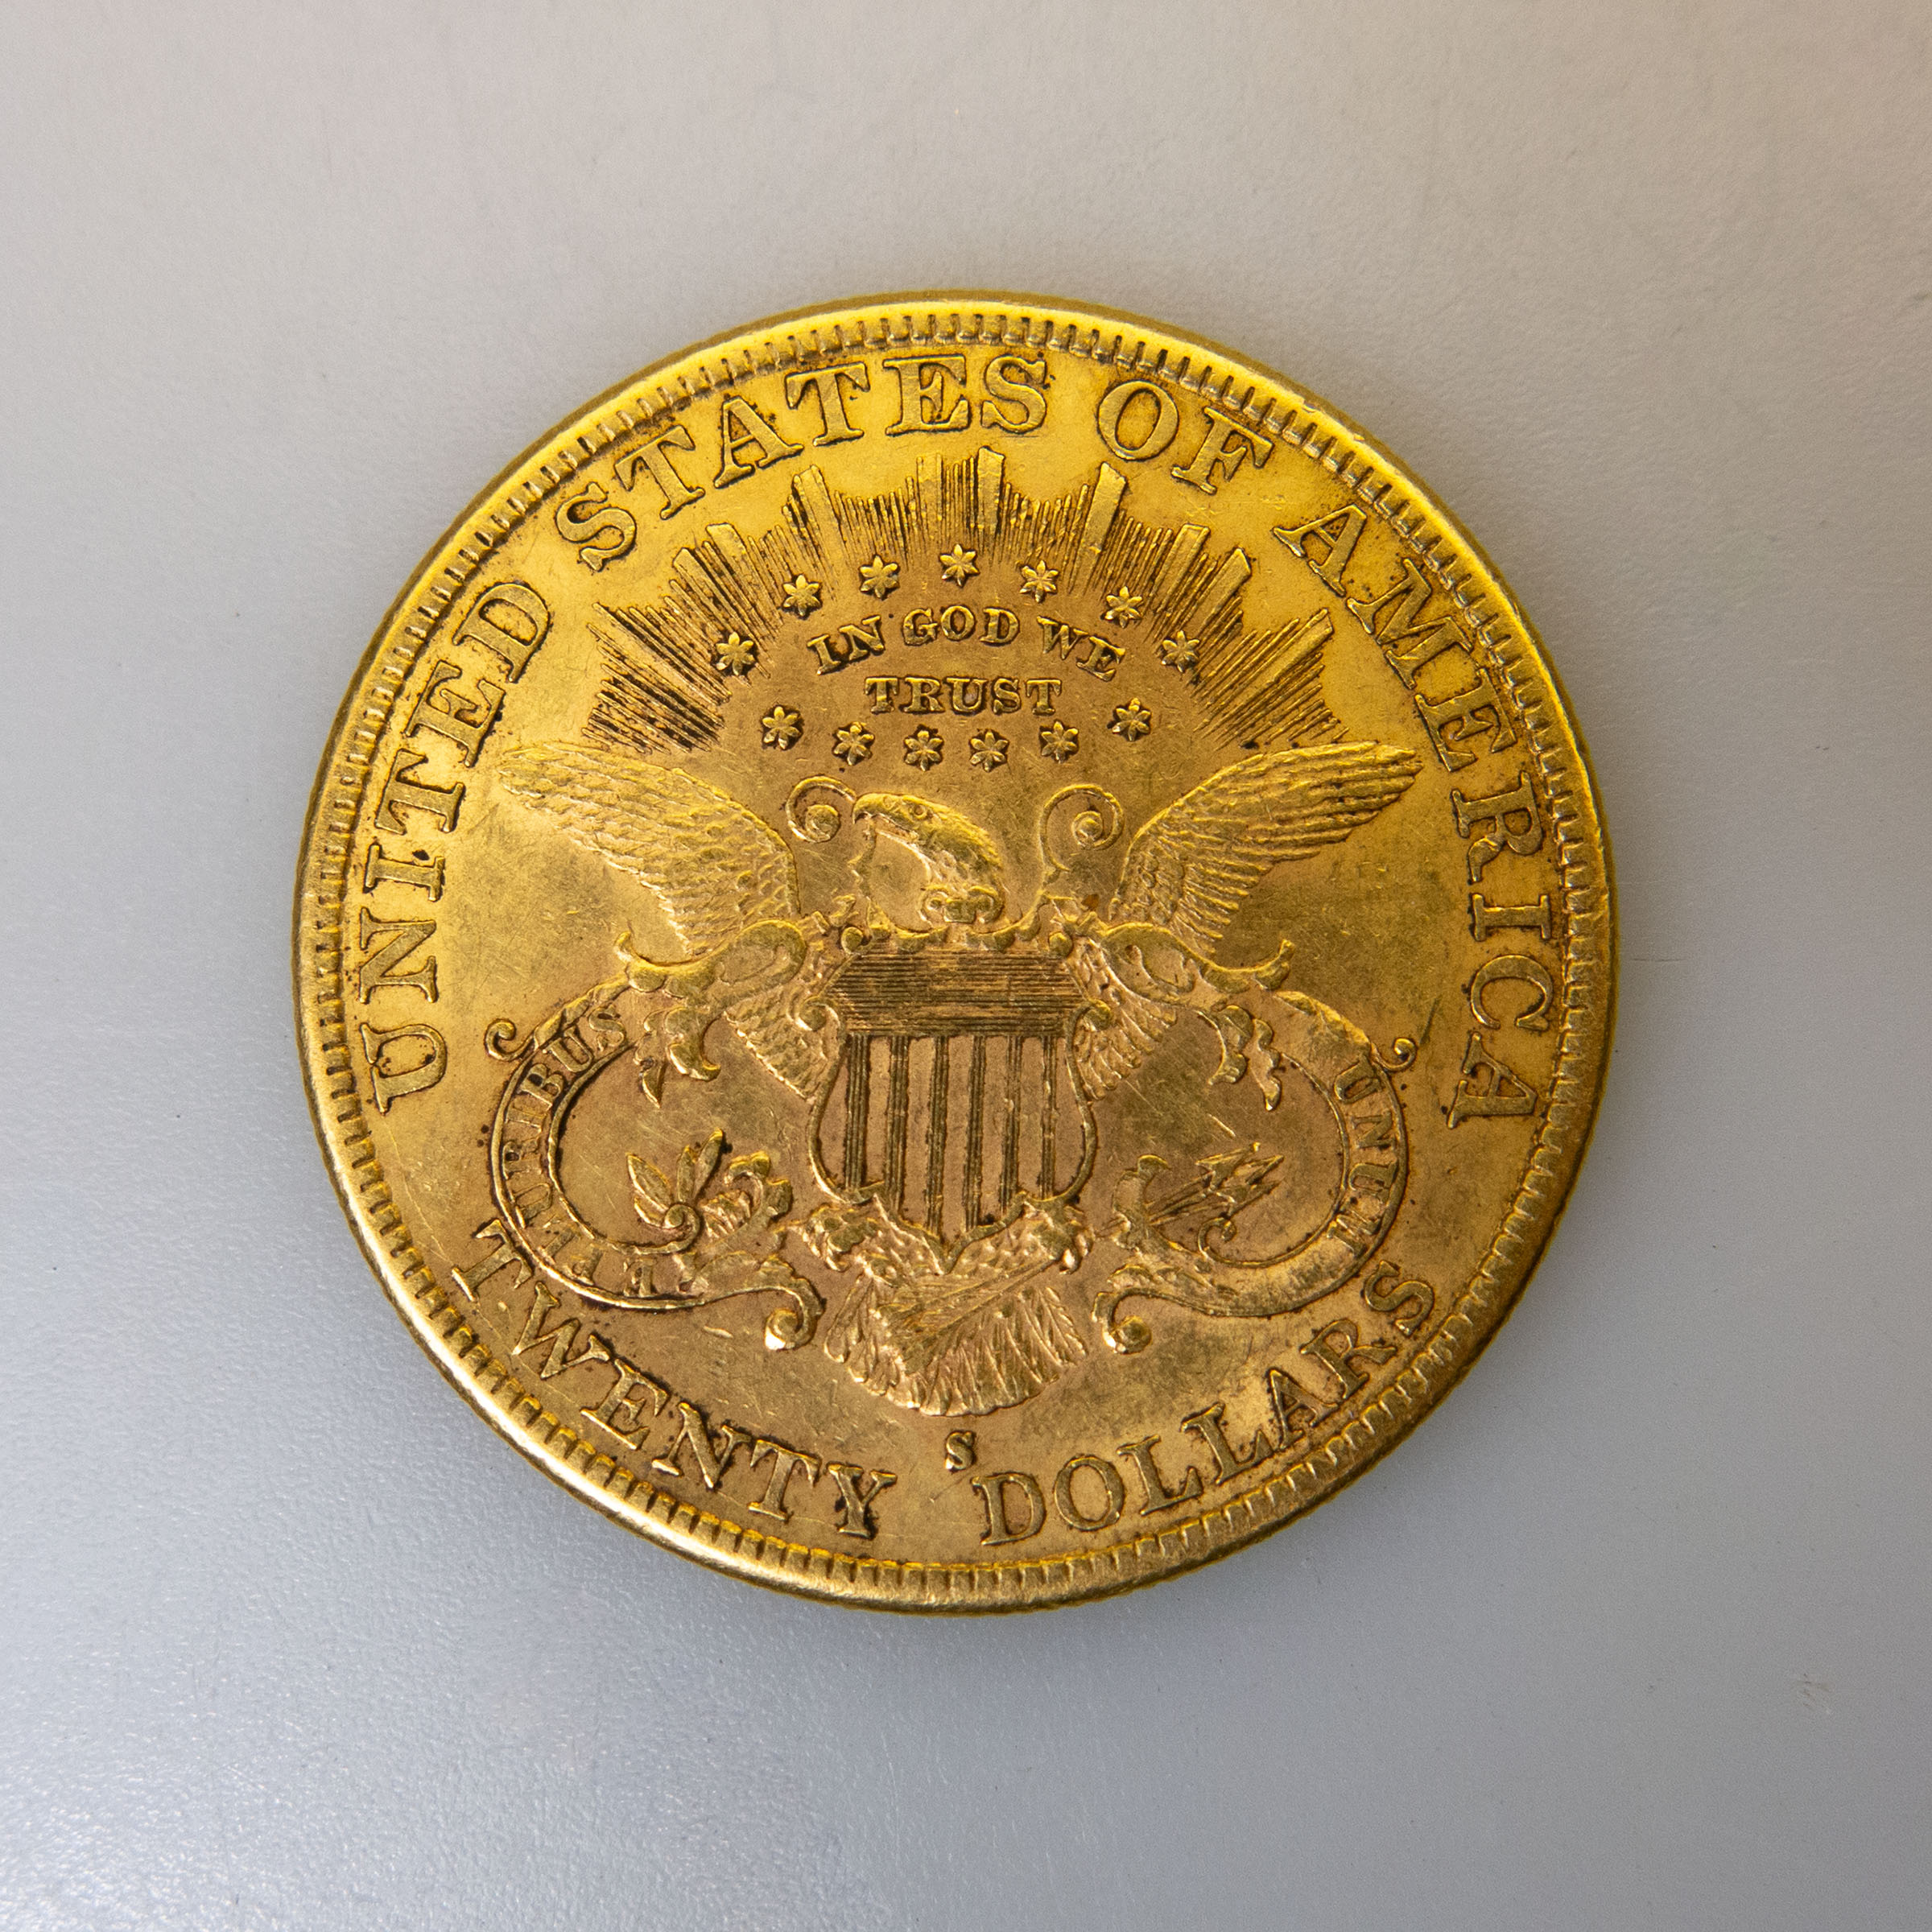 American 1890S $20 Double Eagle Gold Coin